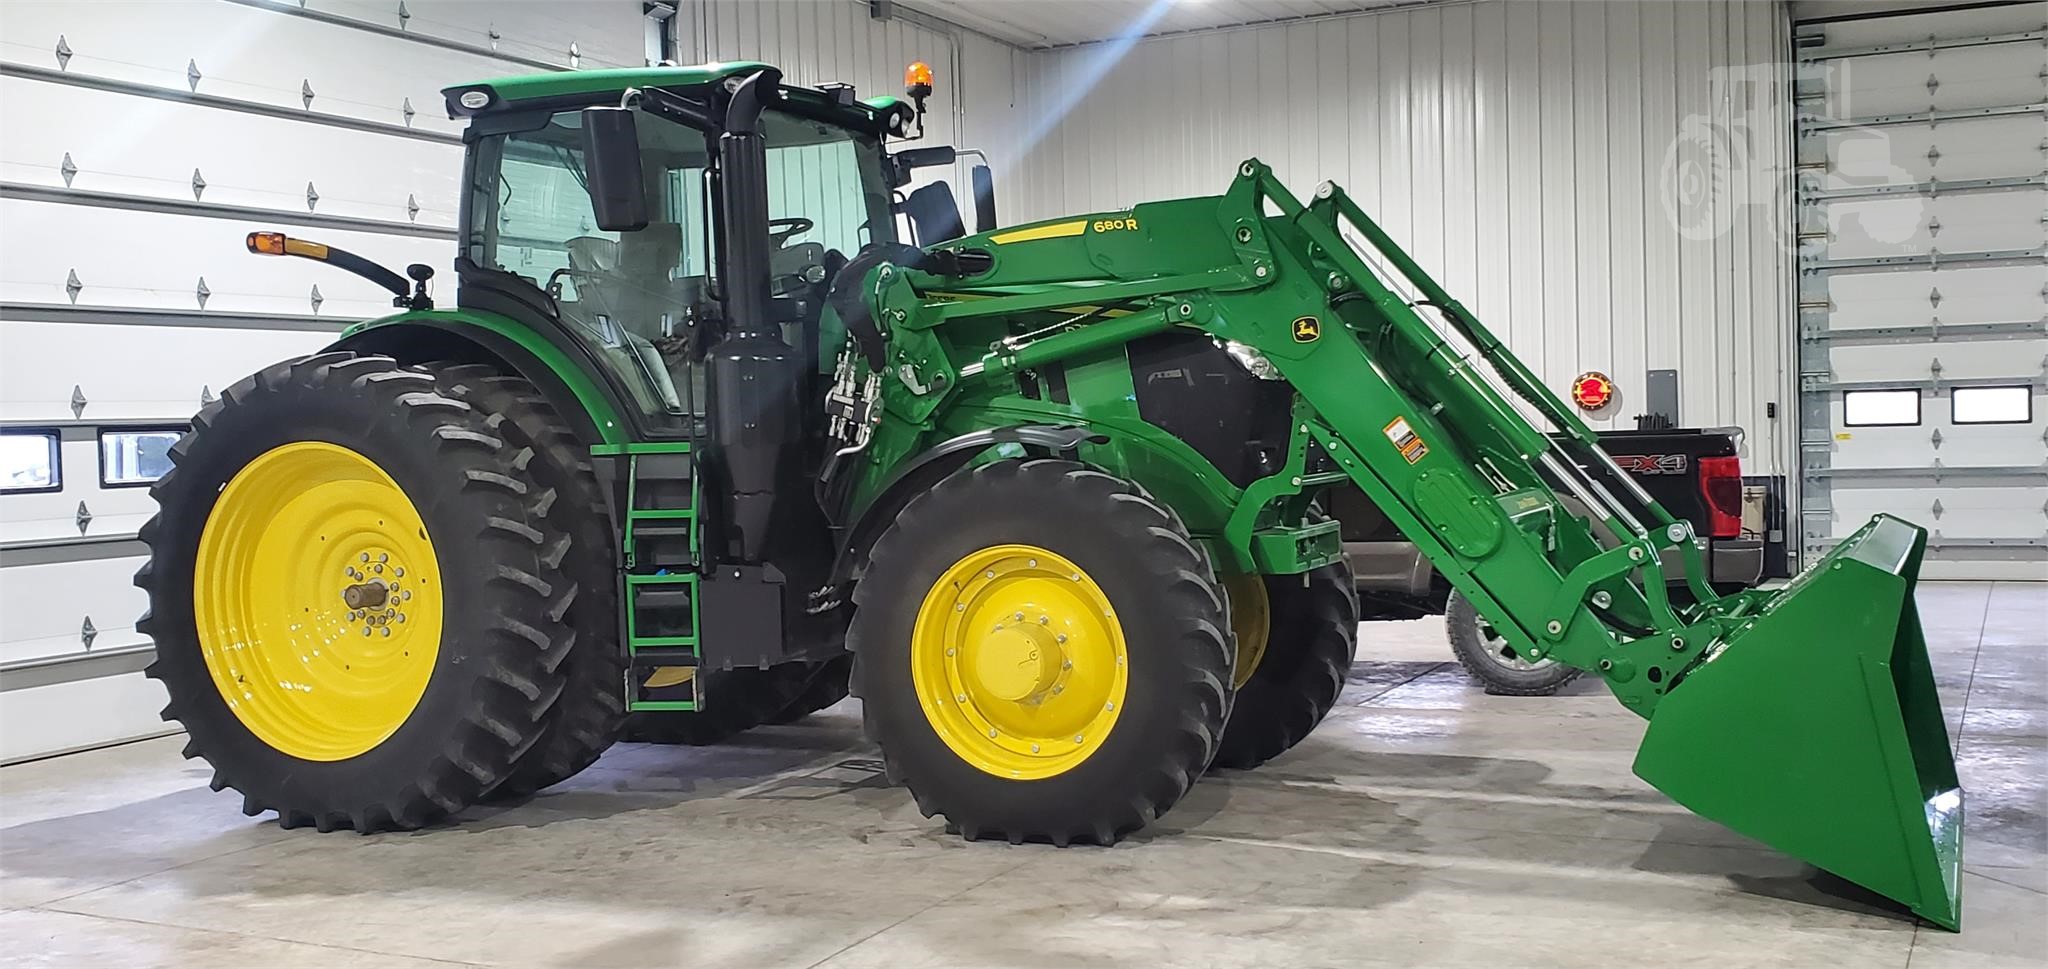 John Deere 6250r For Sale 26 Listings Tractorhouse Com Page 1 Of 2